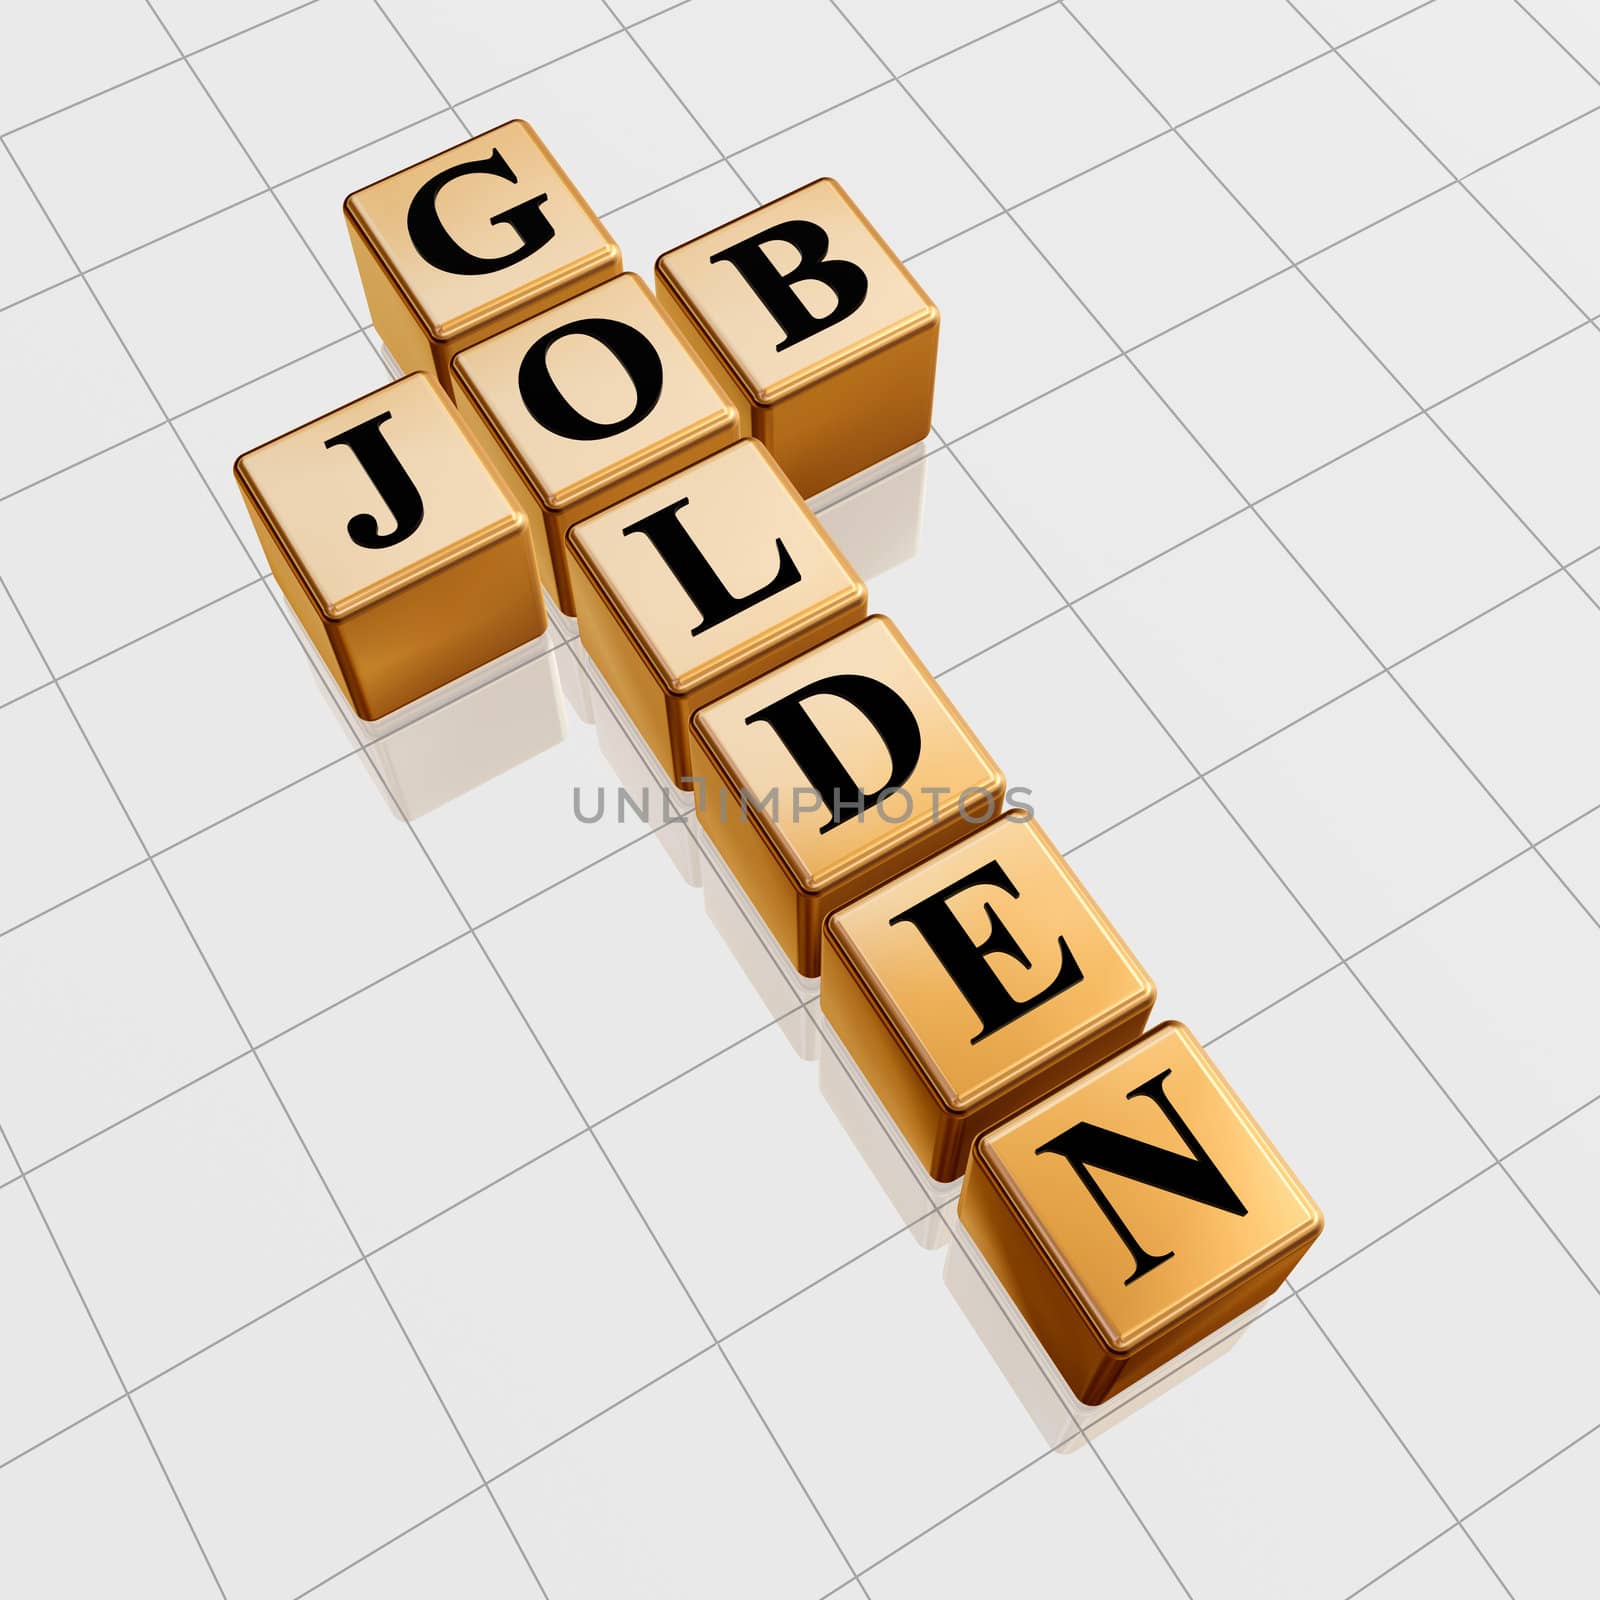 3d gold boxes with text - golden job, crossword